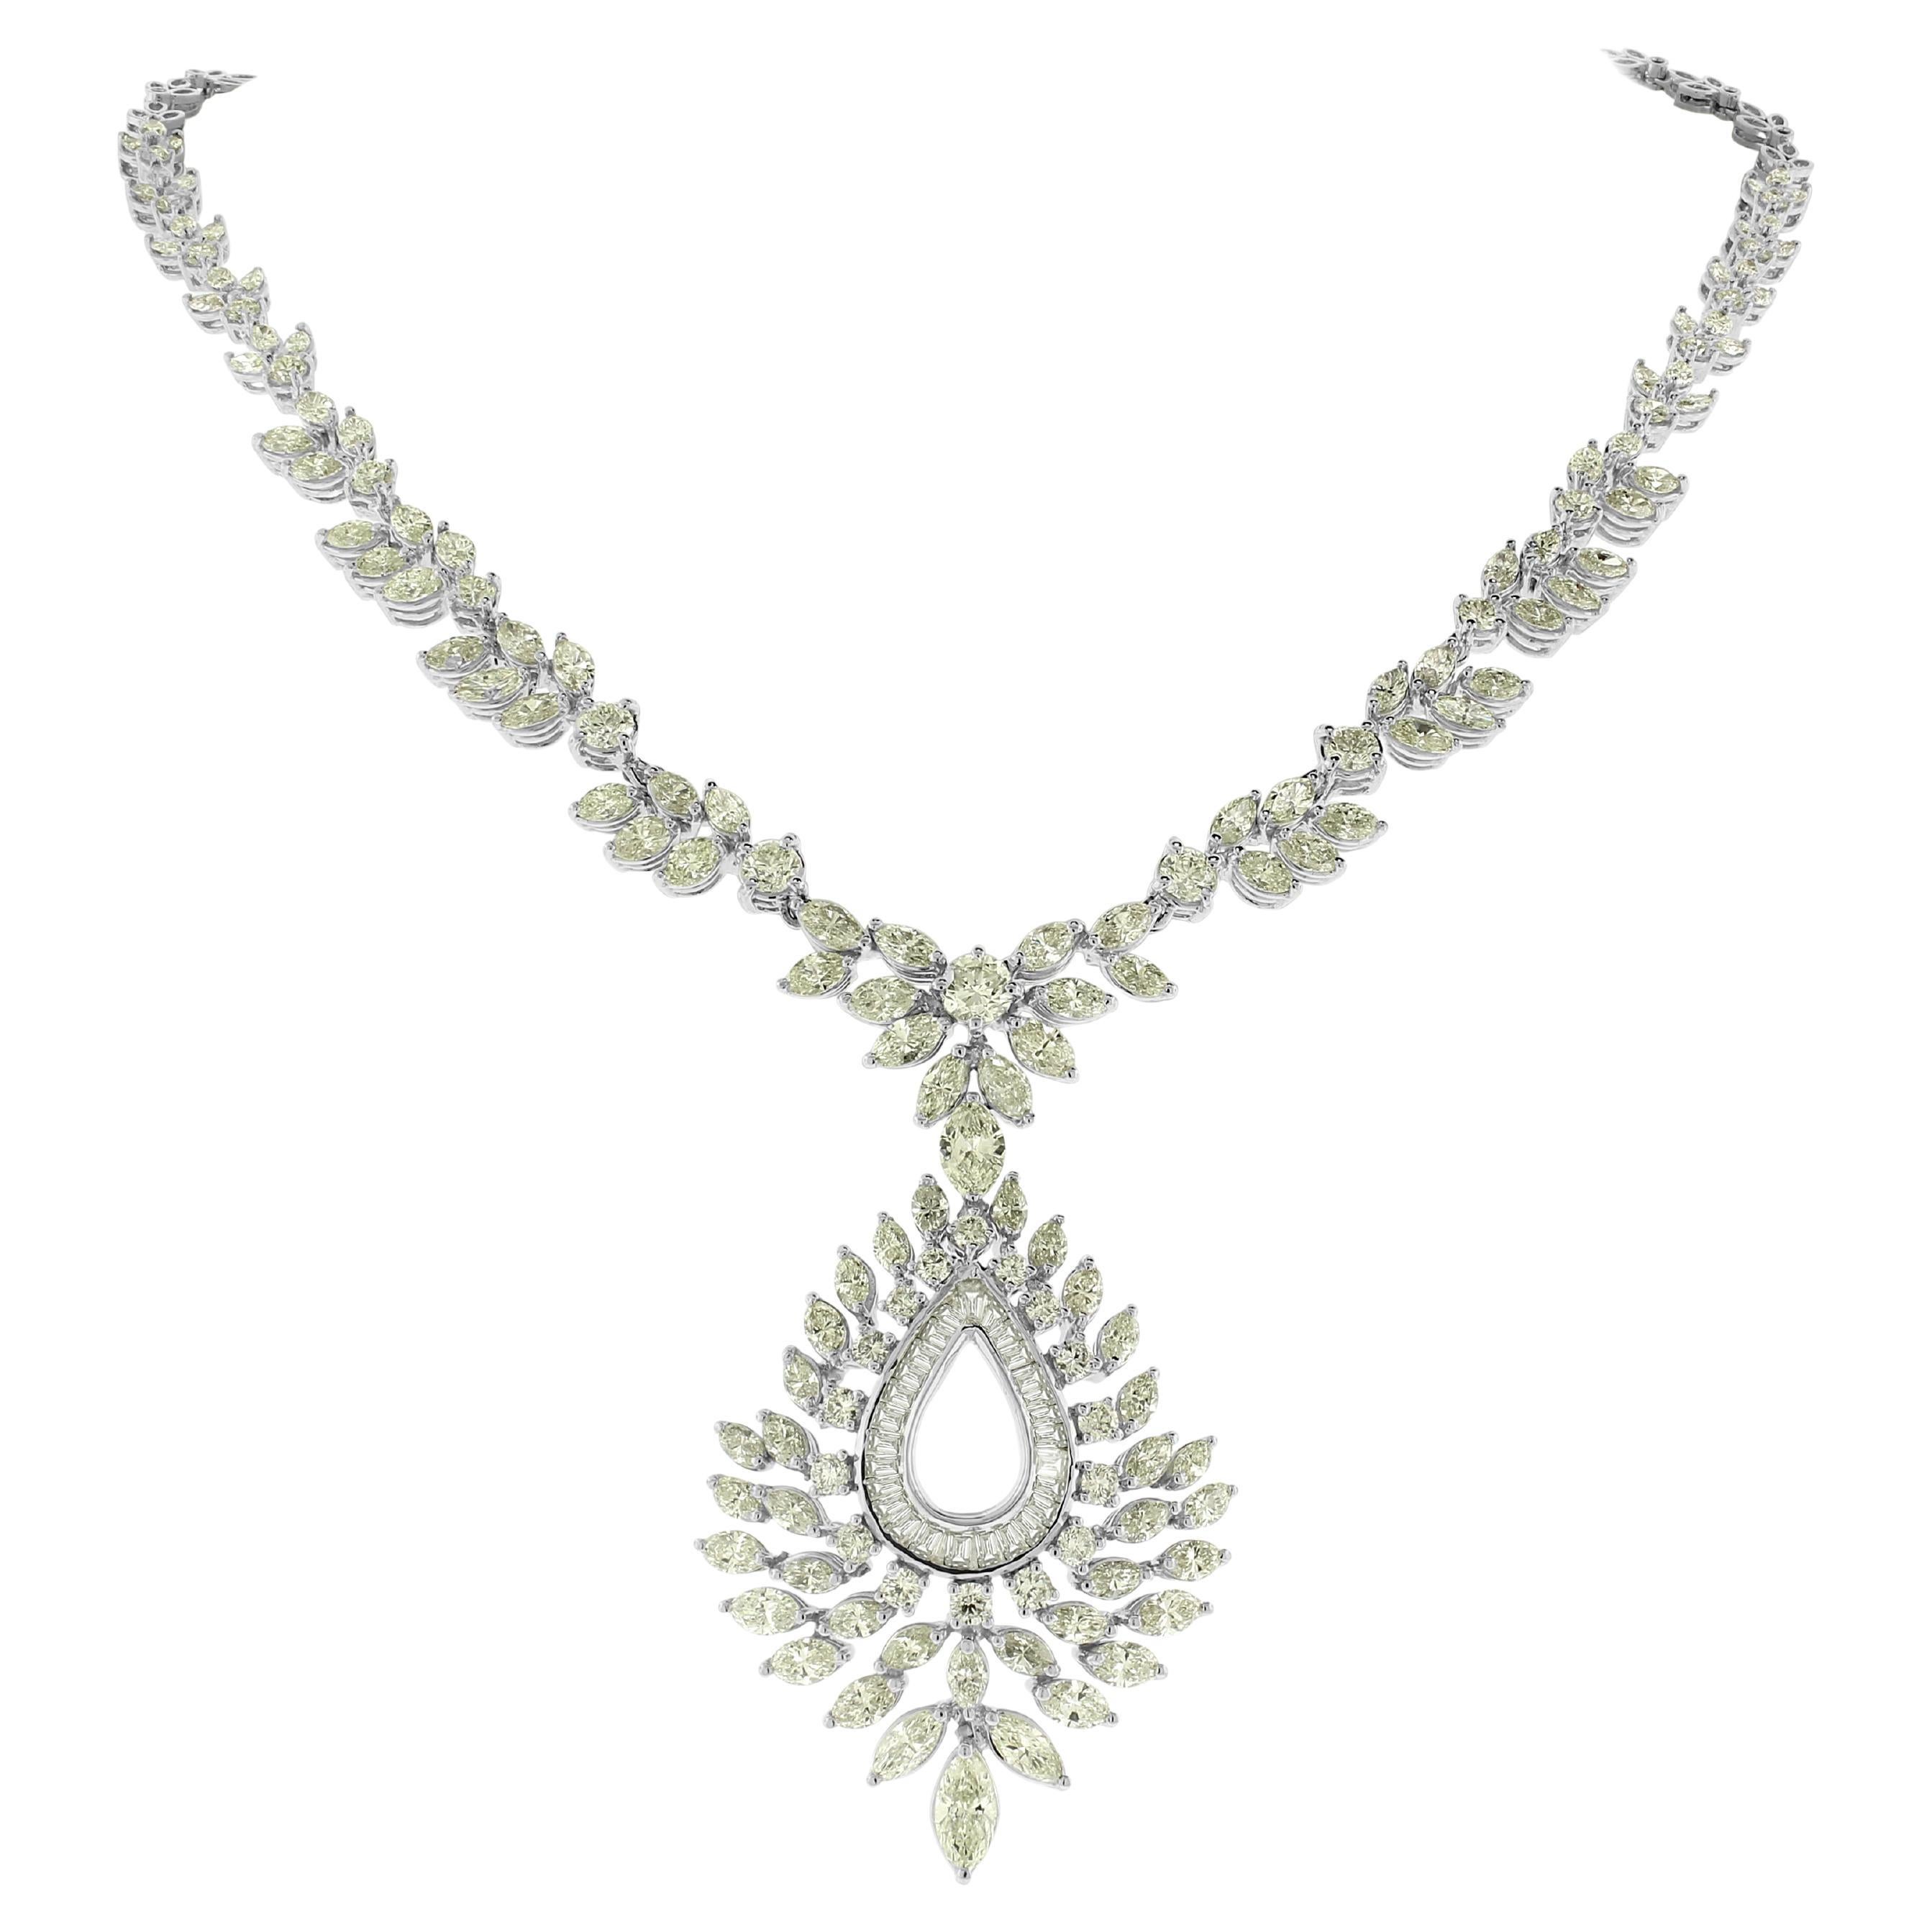 Beauvince Lola Diamond Necklace & Earring Suite '31.39 Ct Diamonds'in White Gold For Sale